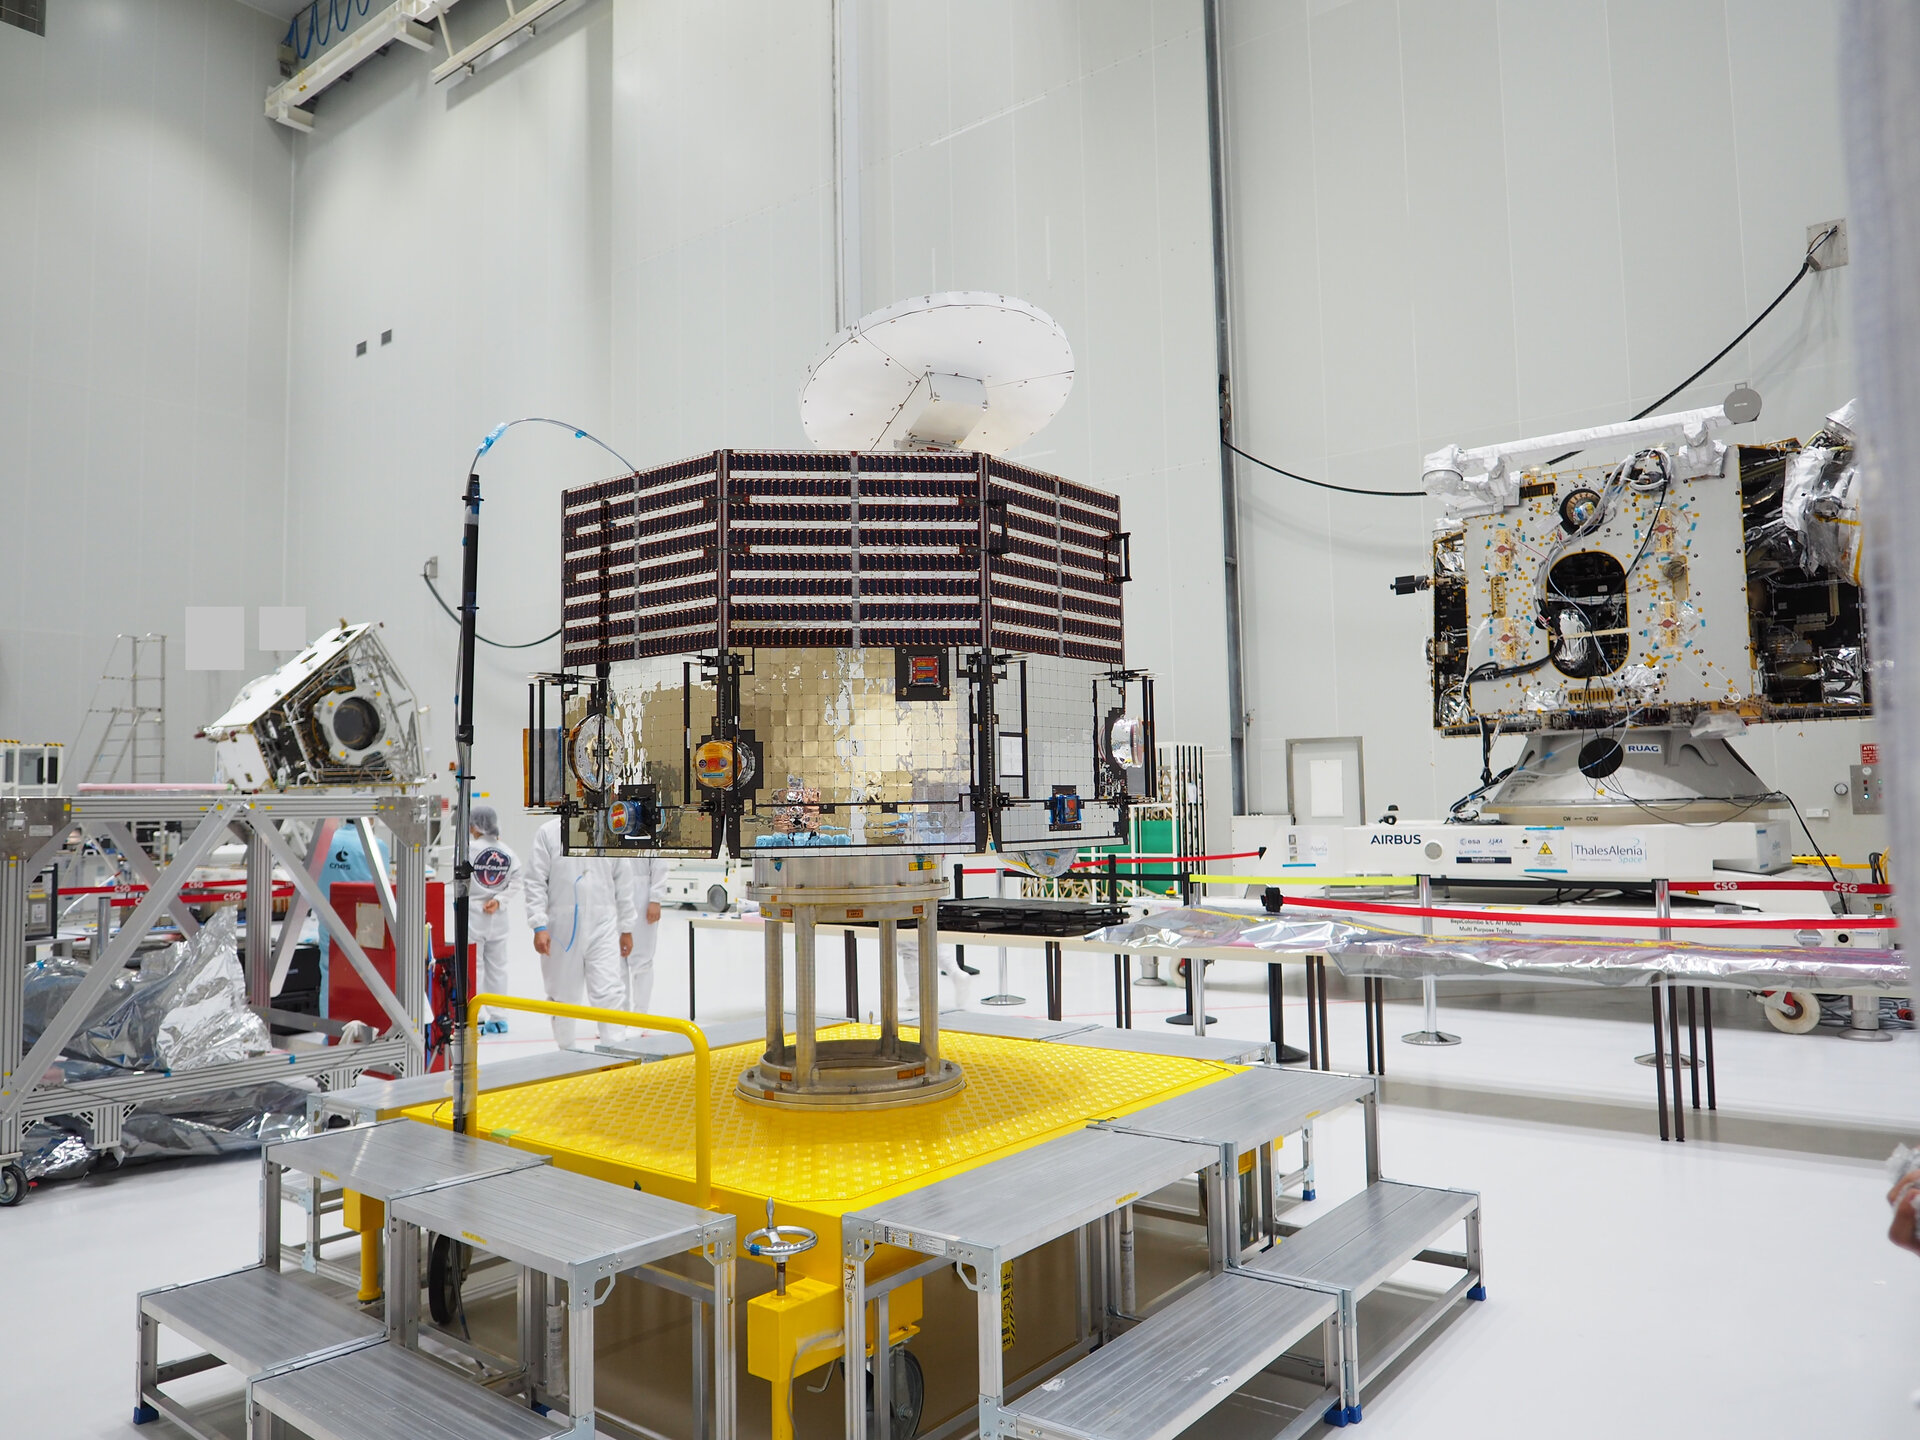 BepiColombo unpacked at the Spaceport